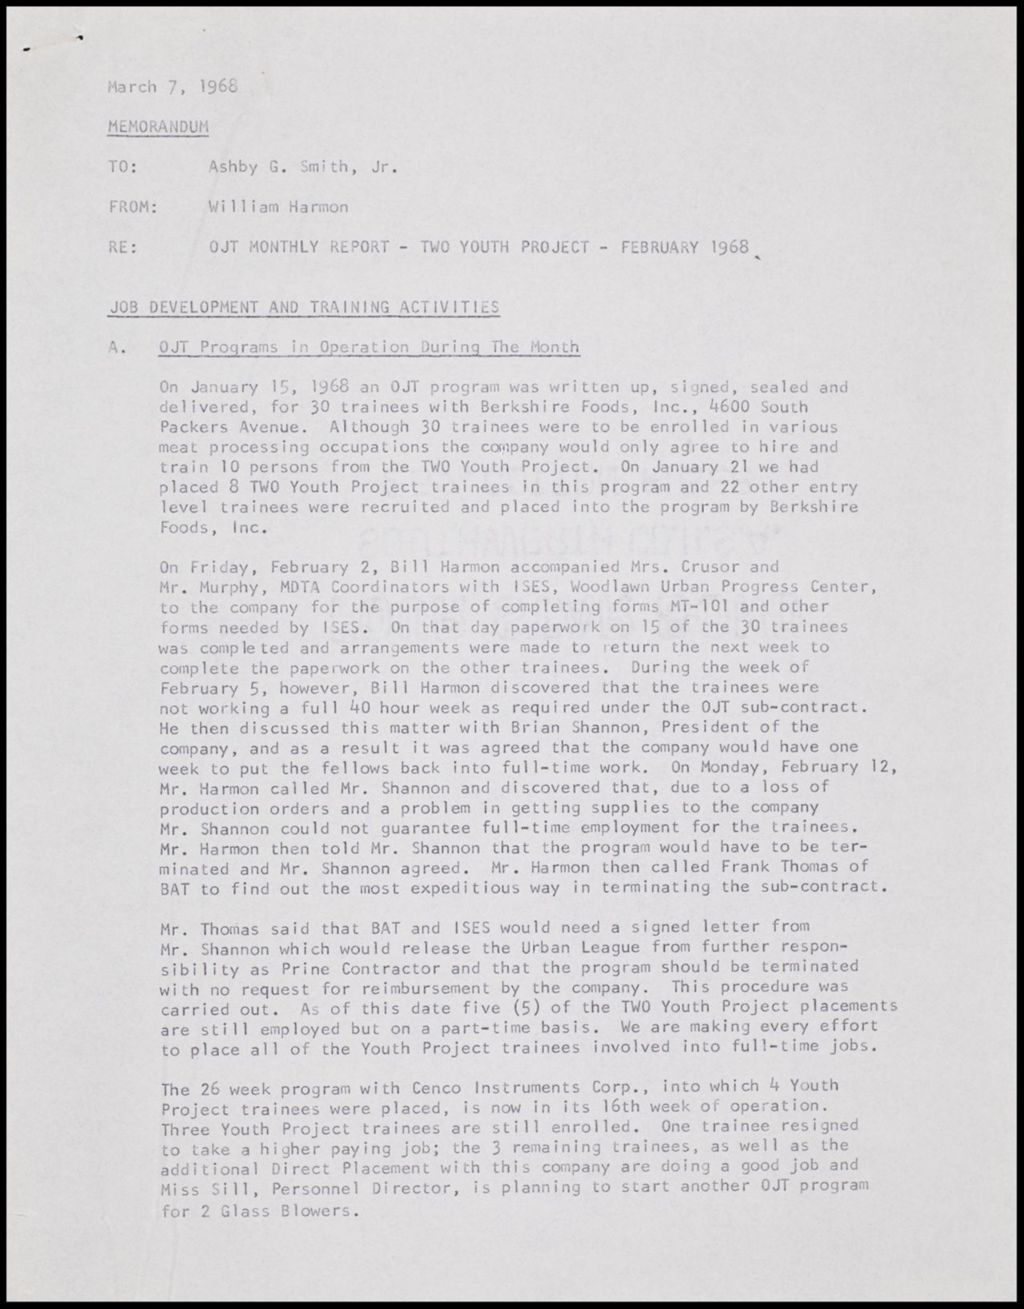 TWO - Youth Project - Reports, 1967-1968 (Folder II-92)